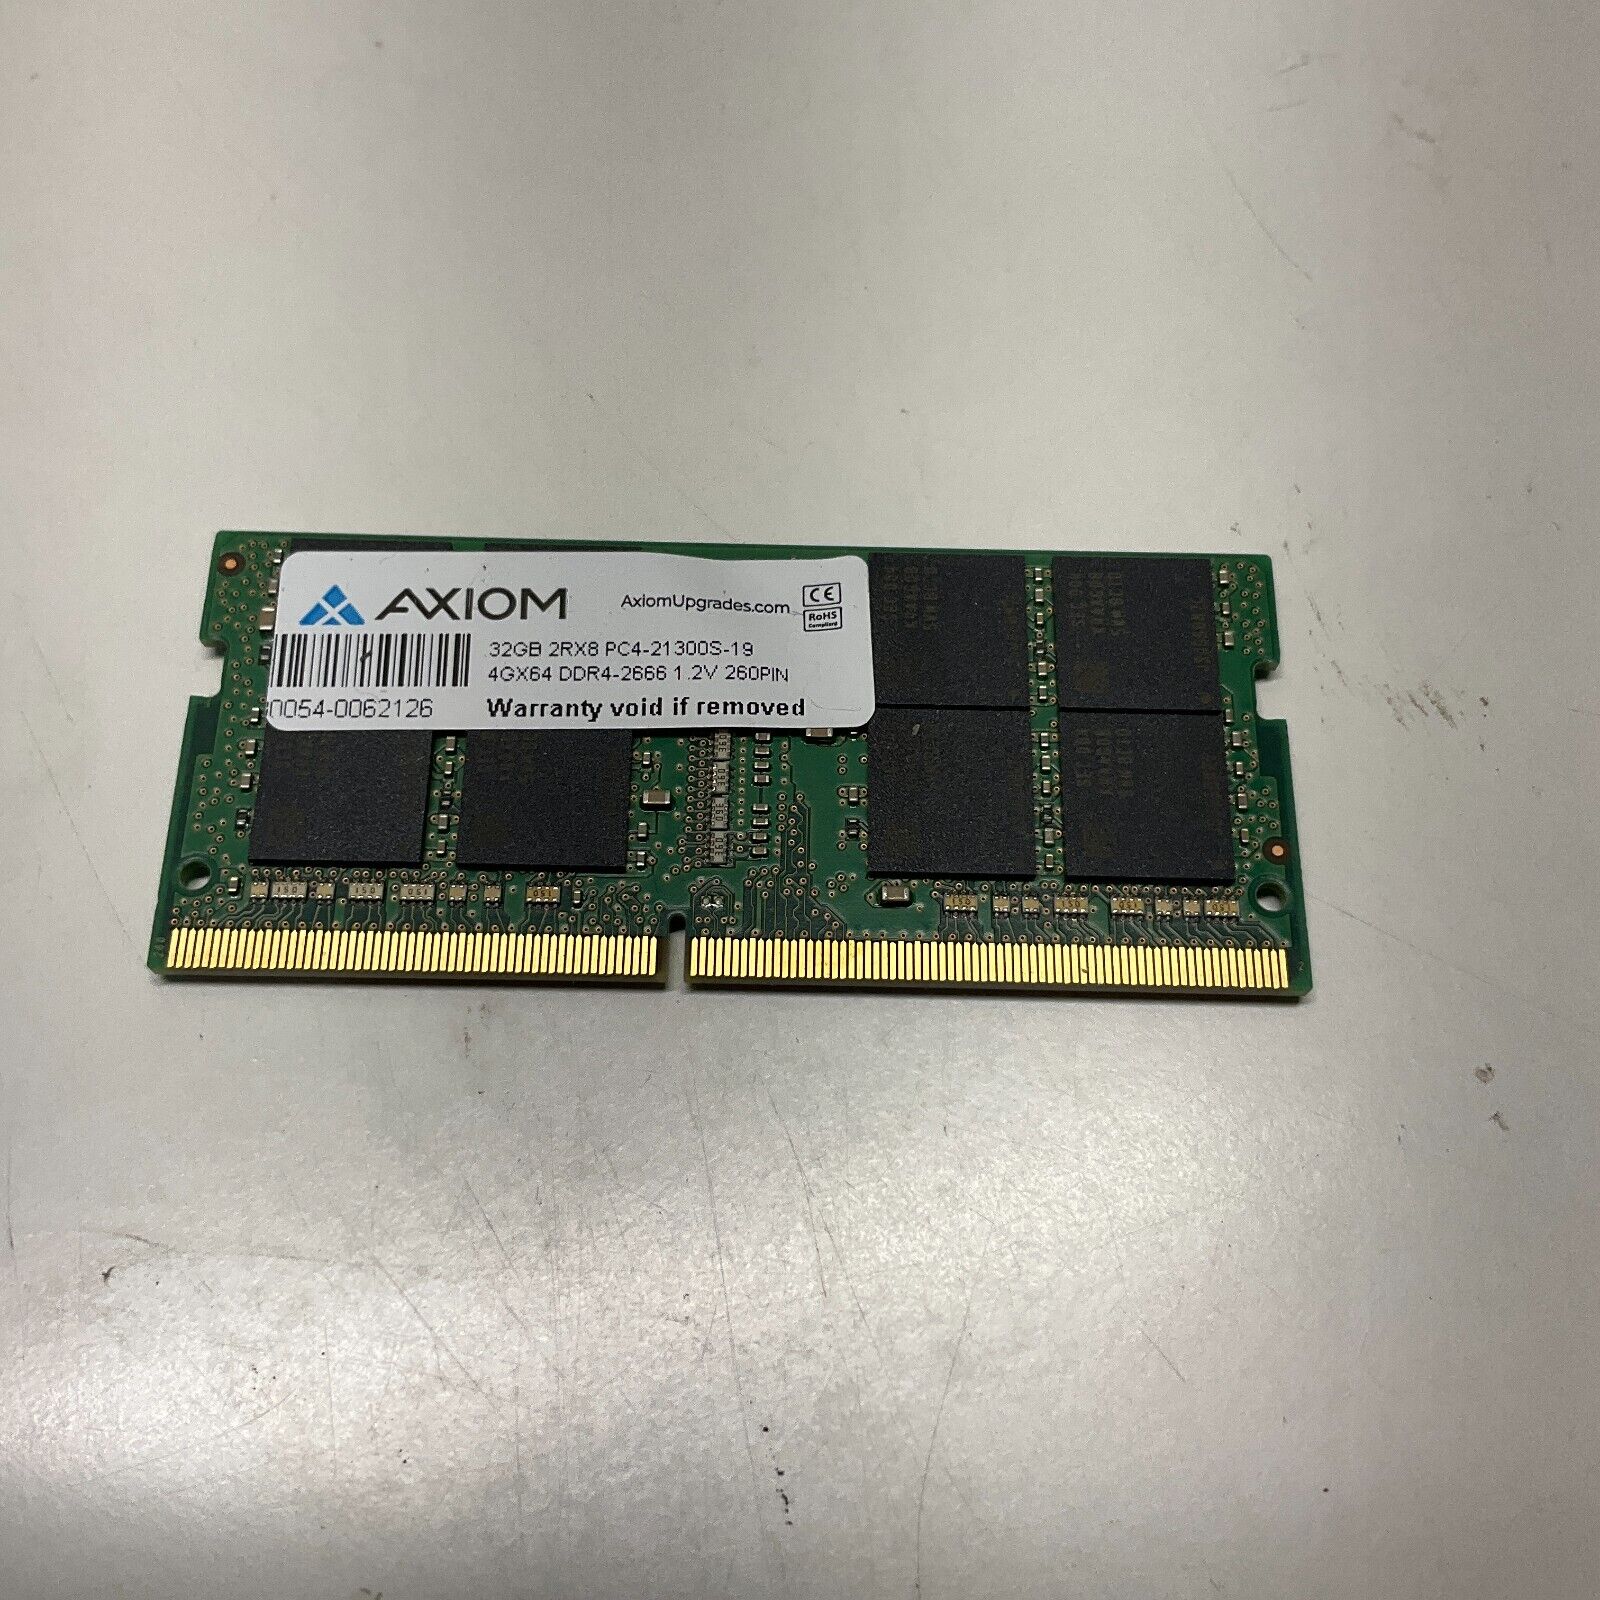 AXIOM 32GB DDR4 PC4-21300S-19SO-DIMM Laptop Memory Tested